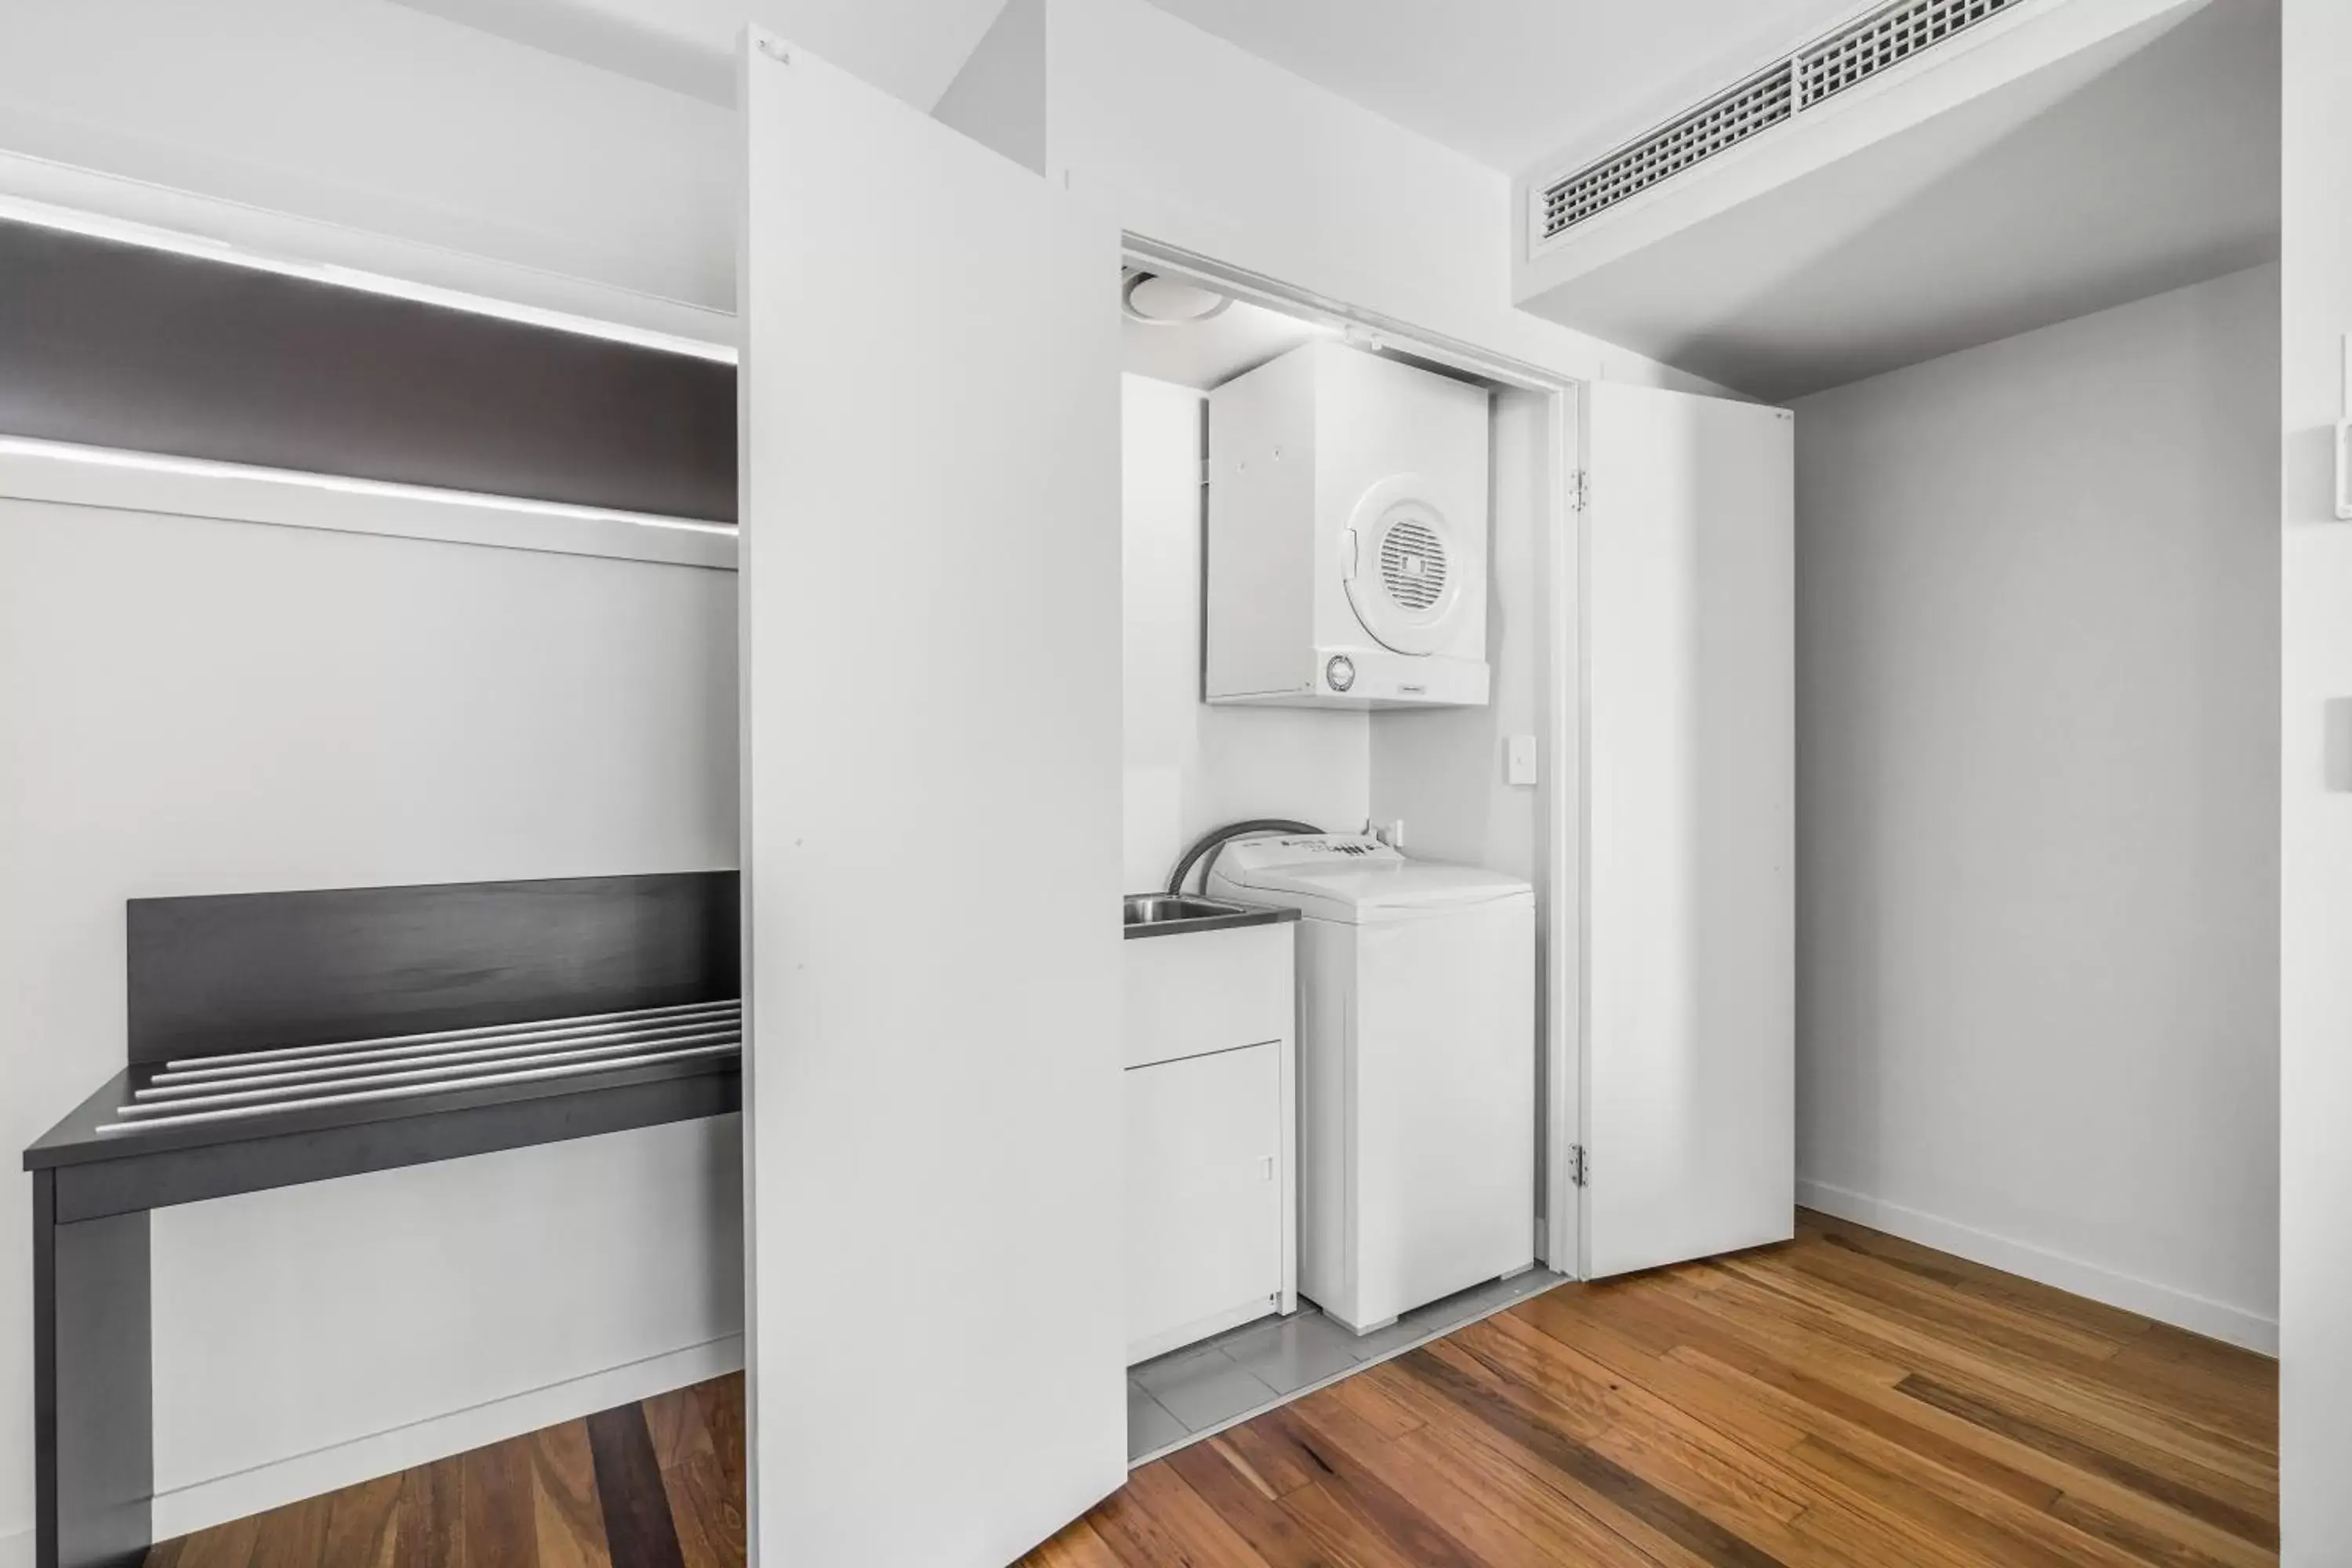 Area and facilities, Bathroom in Essence Apartments Chermside